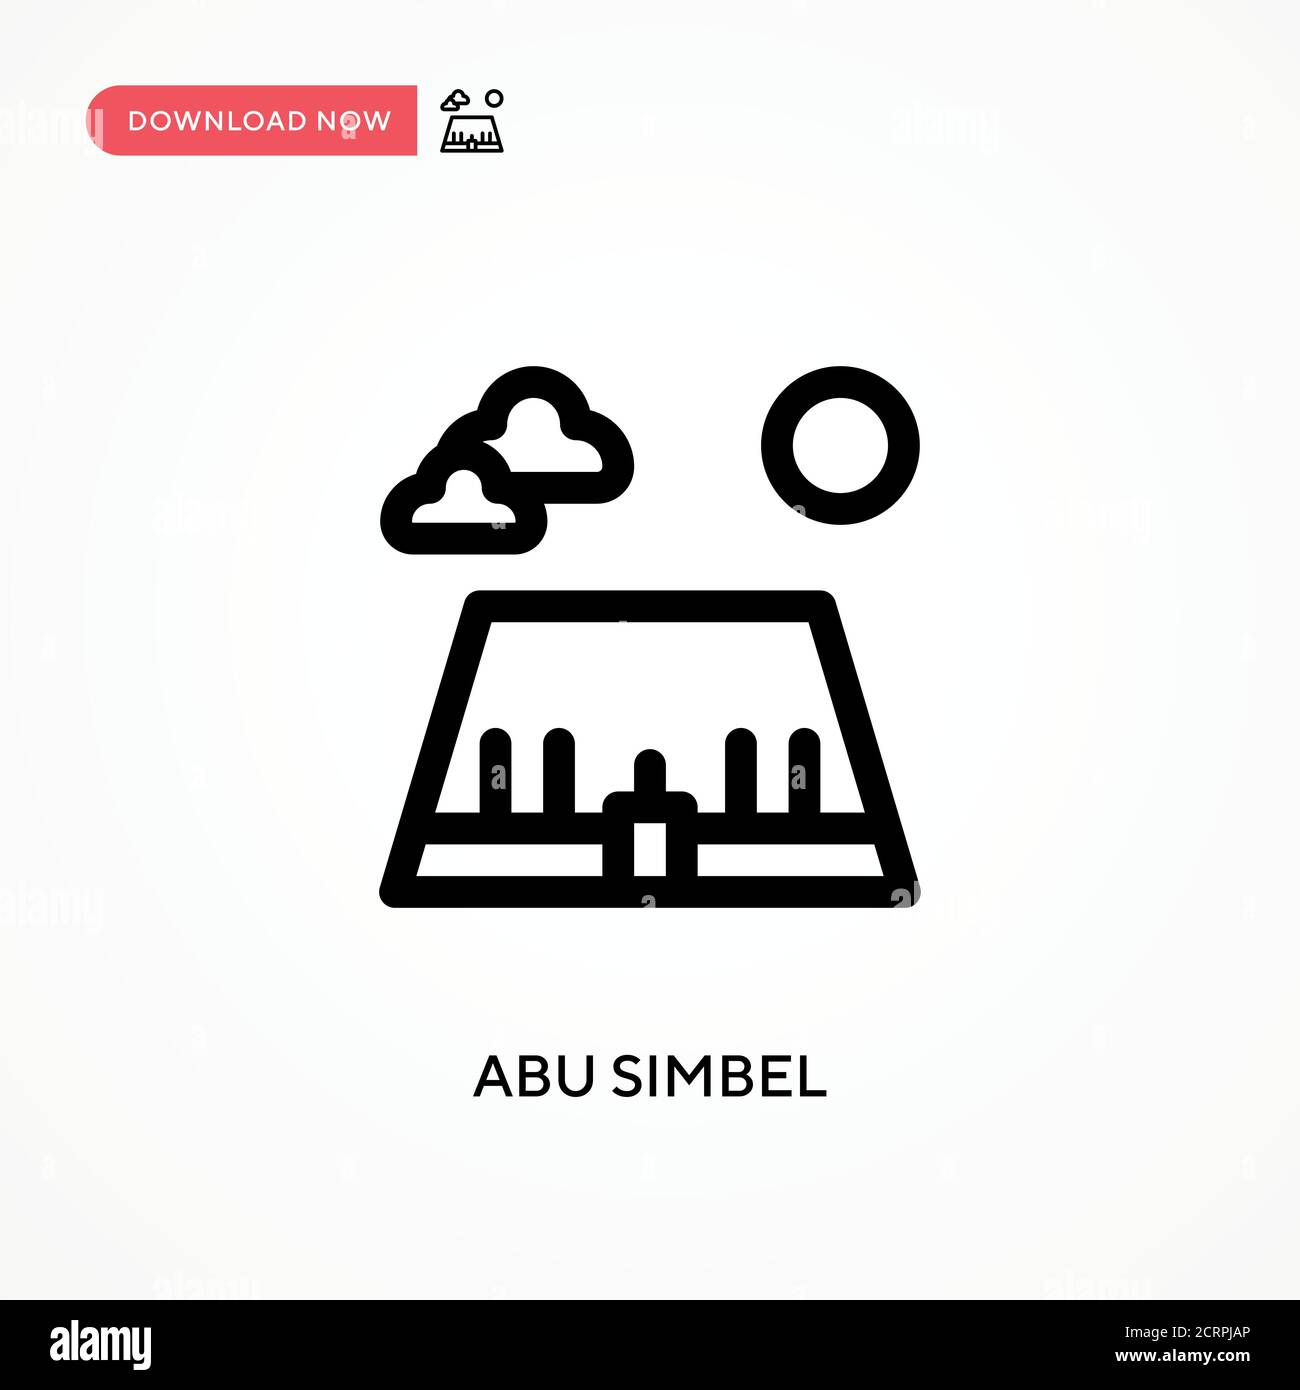 Abu simbel Simple vector icon. Modern, simple flat vector illustration for web site or mobile app Stock Vector